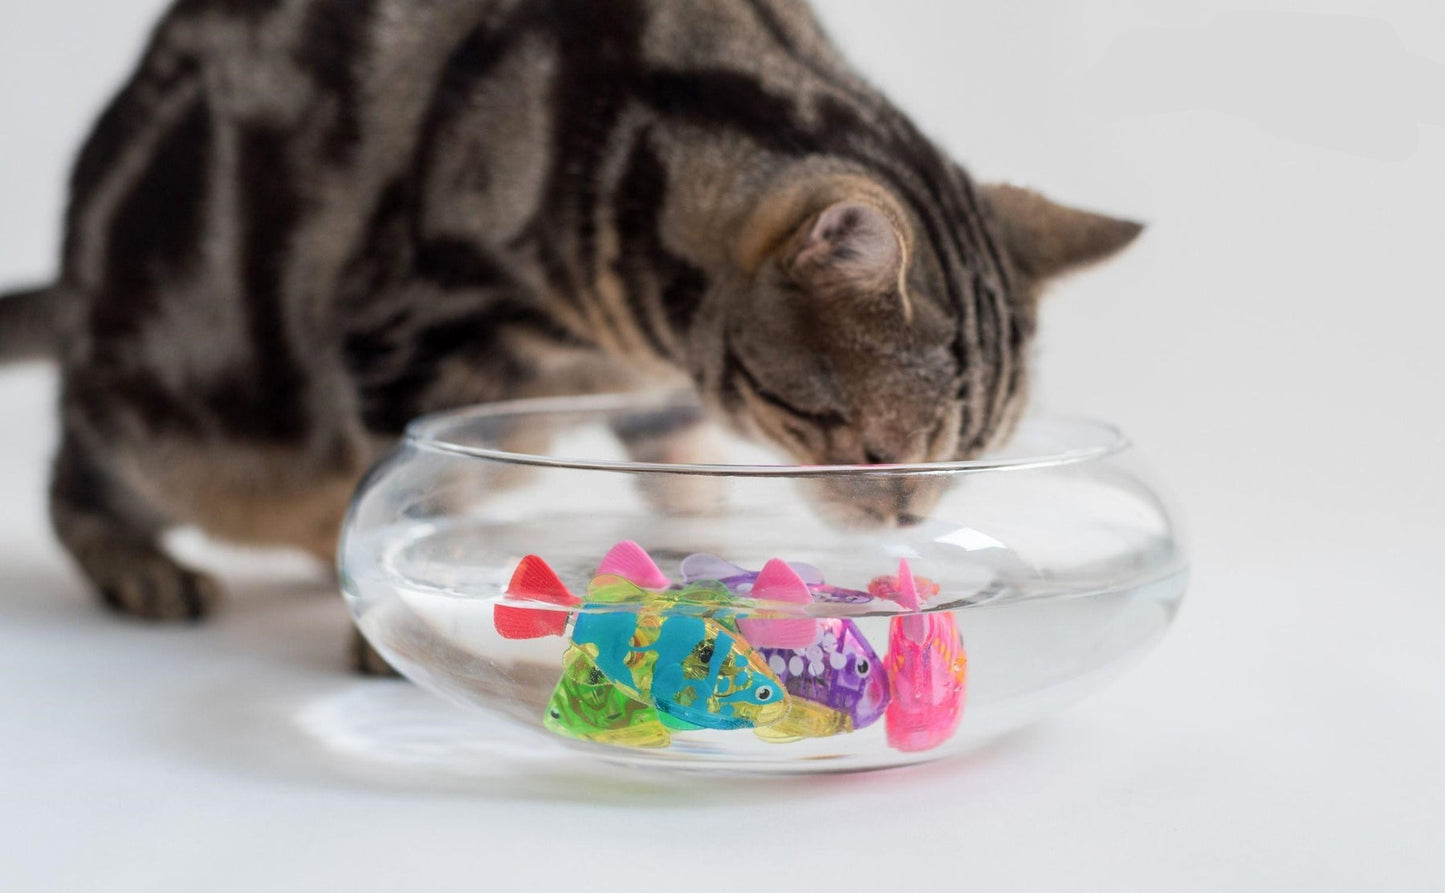 BrandyFish® Cat Interactive LED Electric Fish Toy